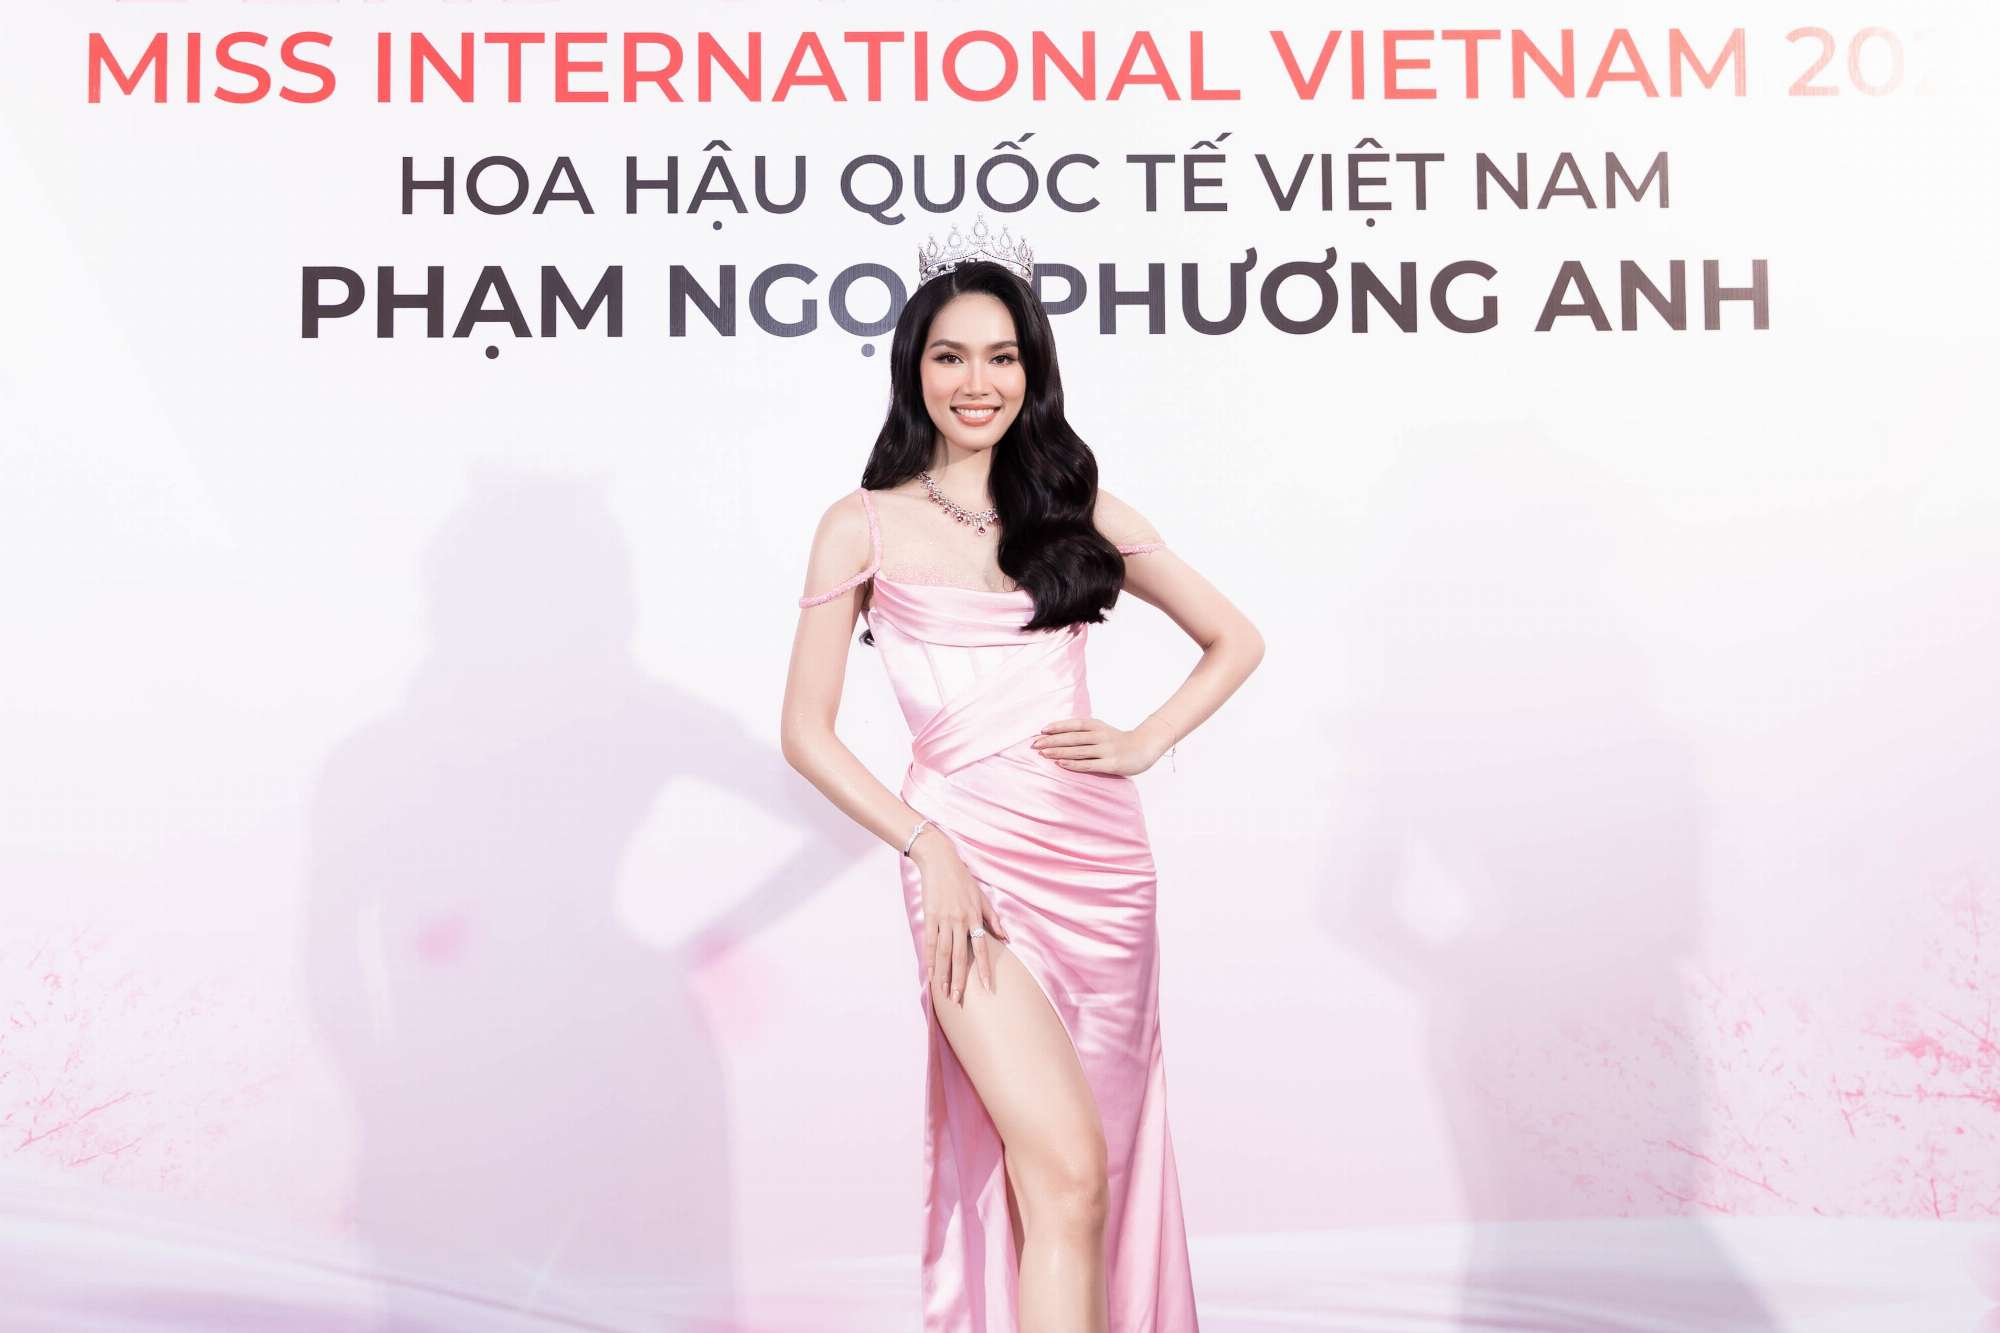 According to the previous announcement, Pham Ngoc Phuong Anh - 1st runner-up of Miss Vietnam 2020 will represent Vietnam to participate in Miss International (Miss International).